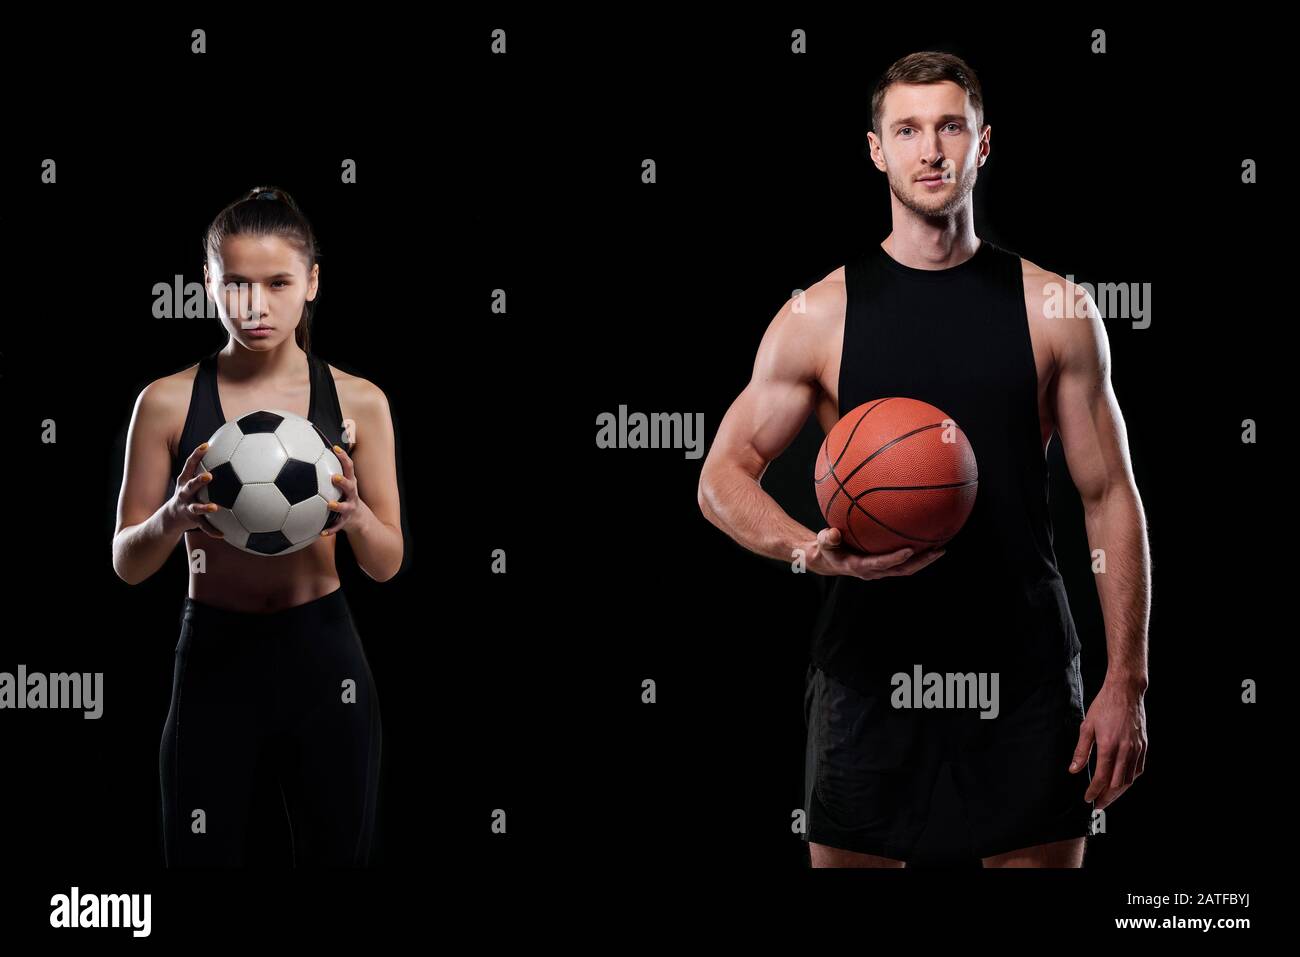 Pretty young soccer player and muscular male basketballer holding balls Stock Photo